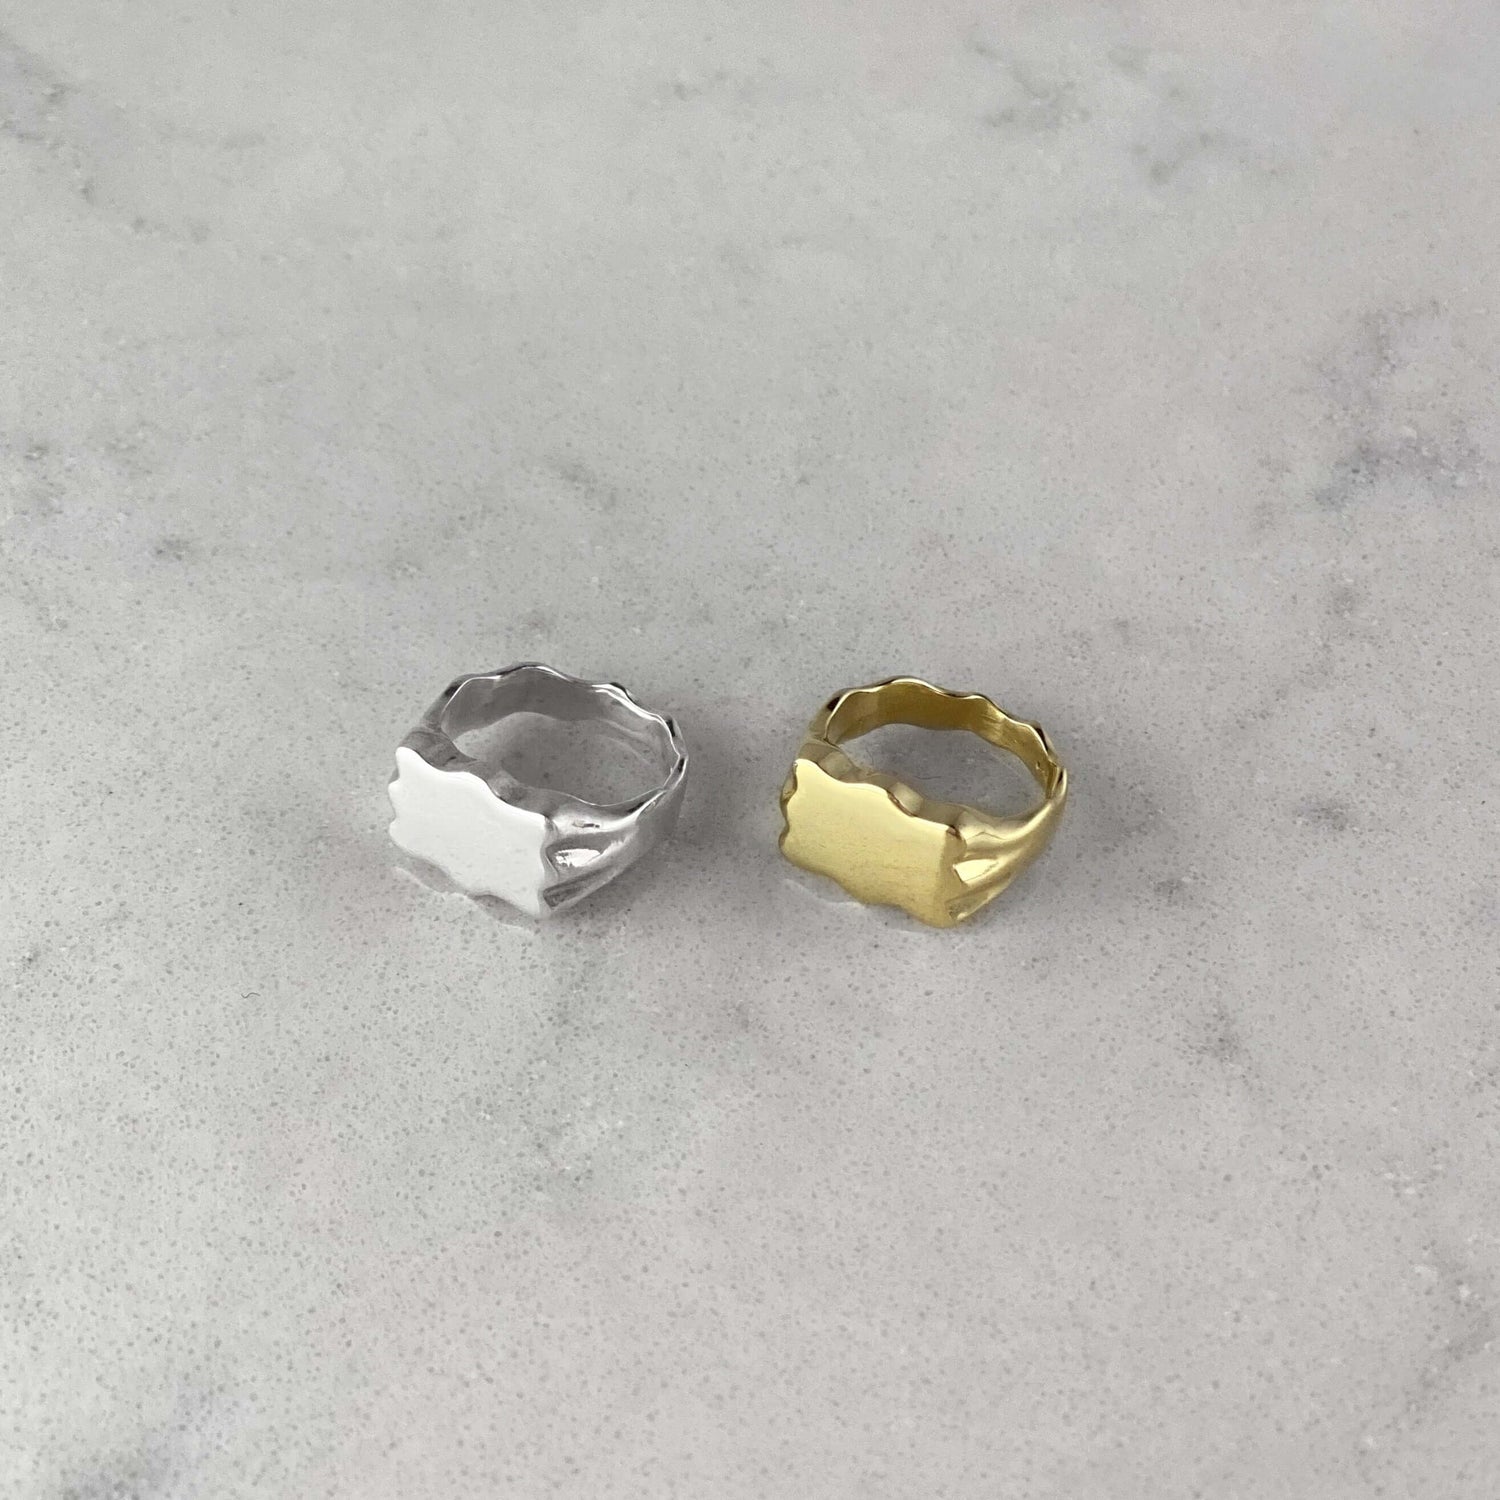 Product photo of two signet rings, one in silver and one in gold